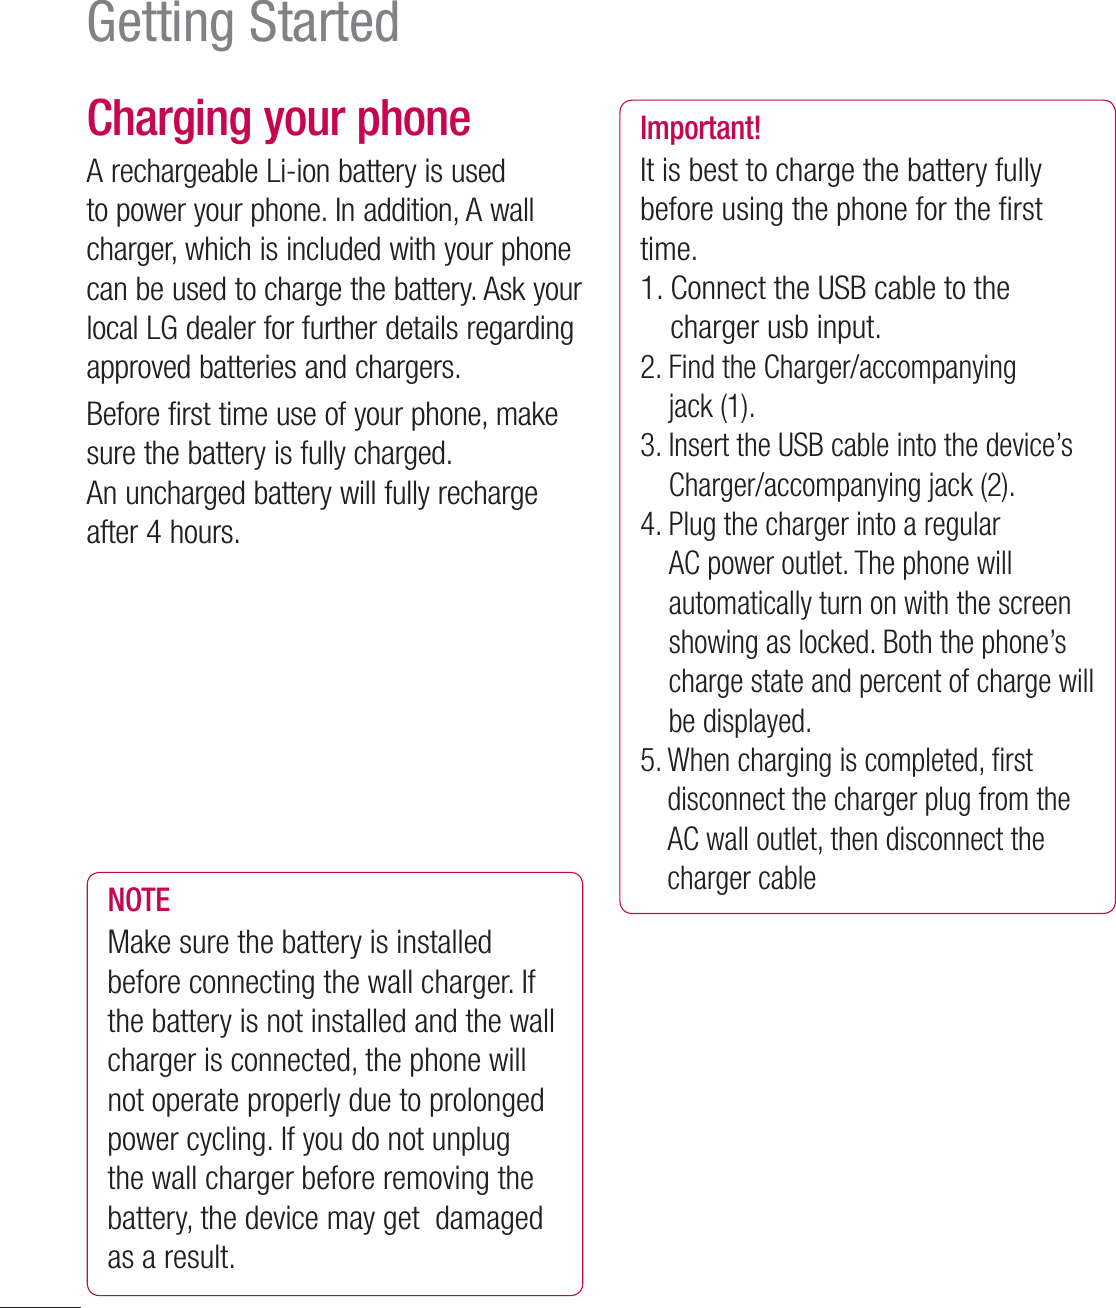 24Charging your phoneA rechargeable Li-ion battery is used to power your phone. In addition, A wall charger, which is included with your phone  can be used to charge the battery. Ask your local LG dealer for further details regarding approved batteries and chargers. Before first time use of your phone, make sure the battery is fully charged. An uncharged battery will fully recharge after 4 hours.Charging HeadUSB CableNOTE Make sure the battery is installed before connecting the wall charger. If the battery is not installed and the wall charger is connected, the phone will not operate properly due to prolonged power cycling. If you do not unplug the wall charger before removing the battery, the device may get  damaged  as a result.Important!It is best to charge the battery fully before using the phone for the ﬁ rst time.1.  Connect the USB cable to the charger usb input.2.  Find the Charger/accompanying jack (1).3.  Insert the USB cable into the device’s Charger/accompanying jack (2).4.  Plug the charger into a regular AC power outlet. The phone will automatically turn on with the screen showing as locked. Both the phone’s charge state and percent of charge will be displayed.5.  When charging is completed, ﬁ rst disconnect the charger plug from the AC wall outlet, then disconnect the charger cableGetting Started